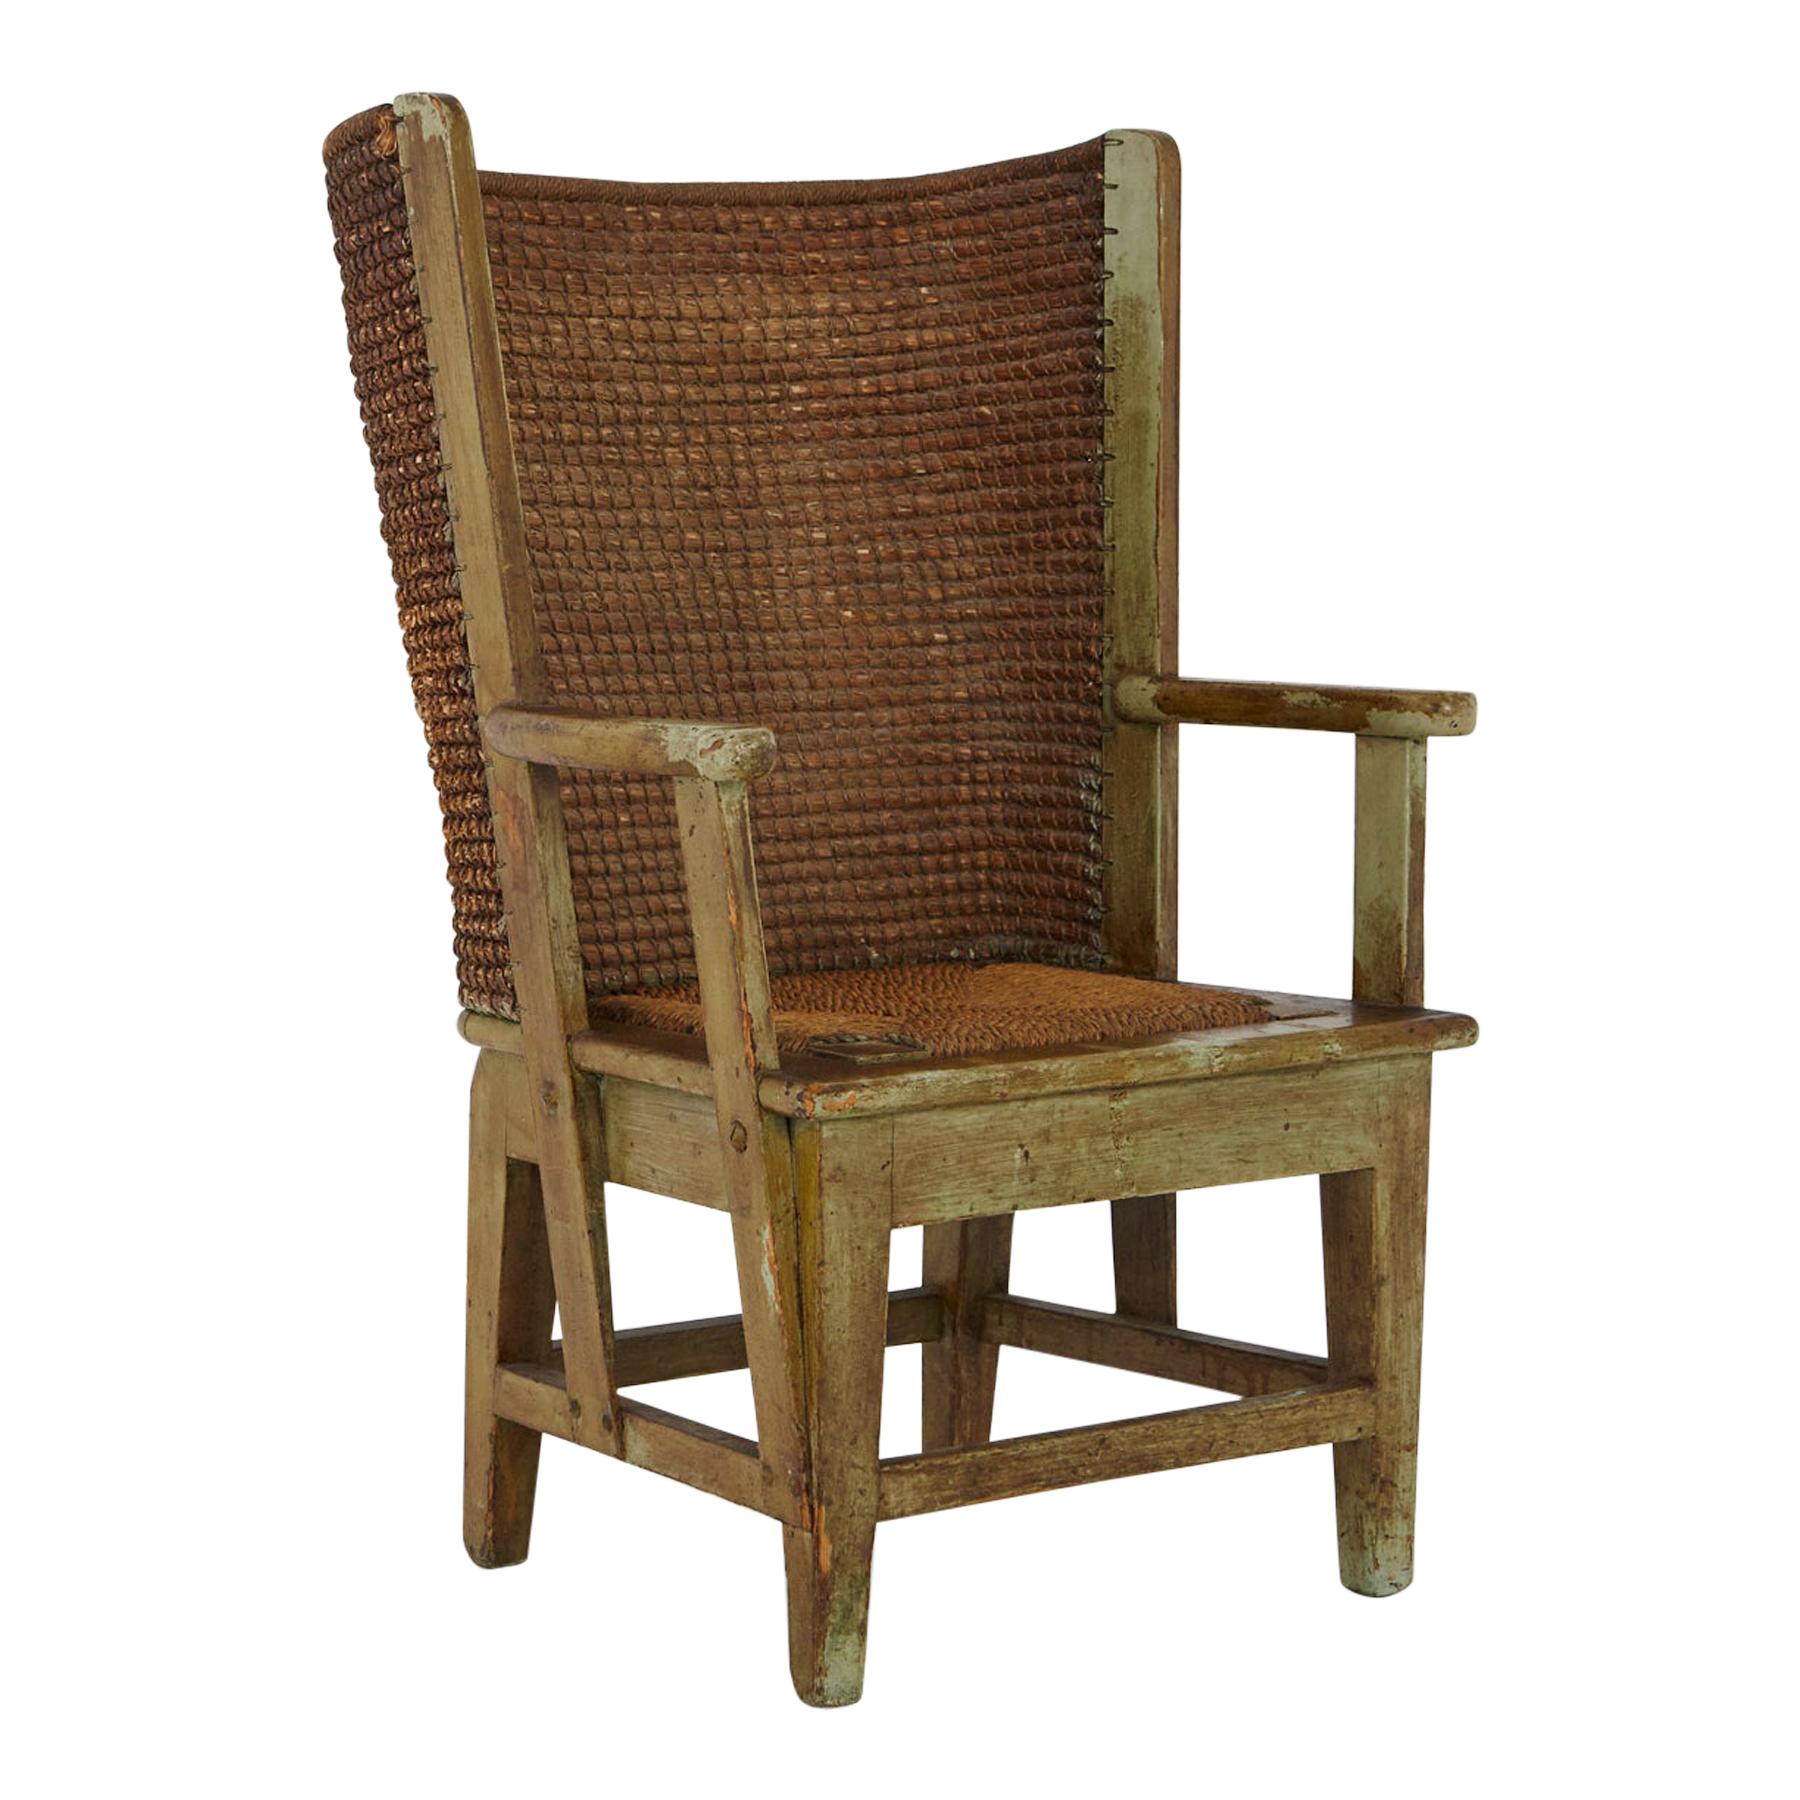 Child's Orkney Chair with Hand Woven Straw Back, Scotland, 19th Century For Sale